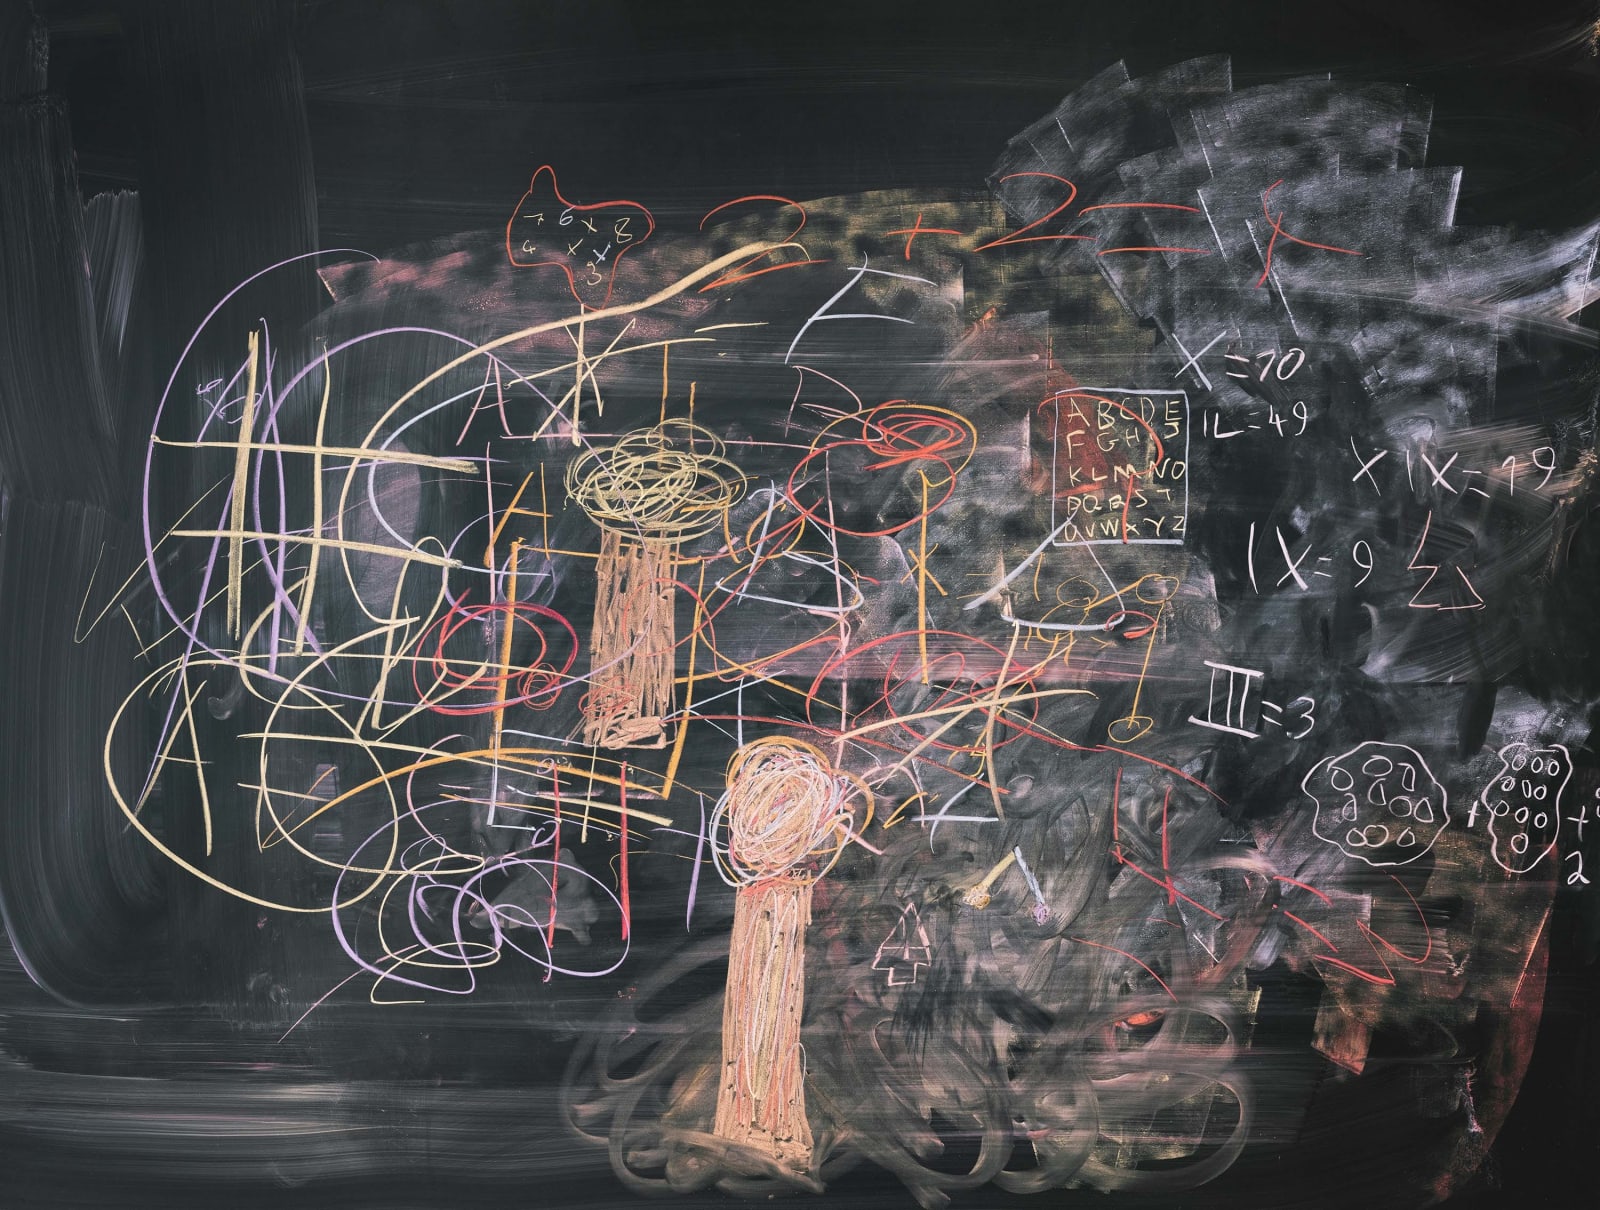 Photograph of chalkboard with first graders' drawings in orange chalk by Jessica Wynne